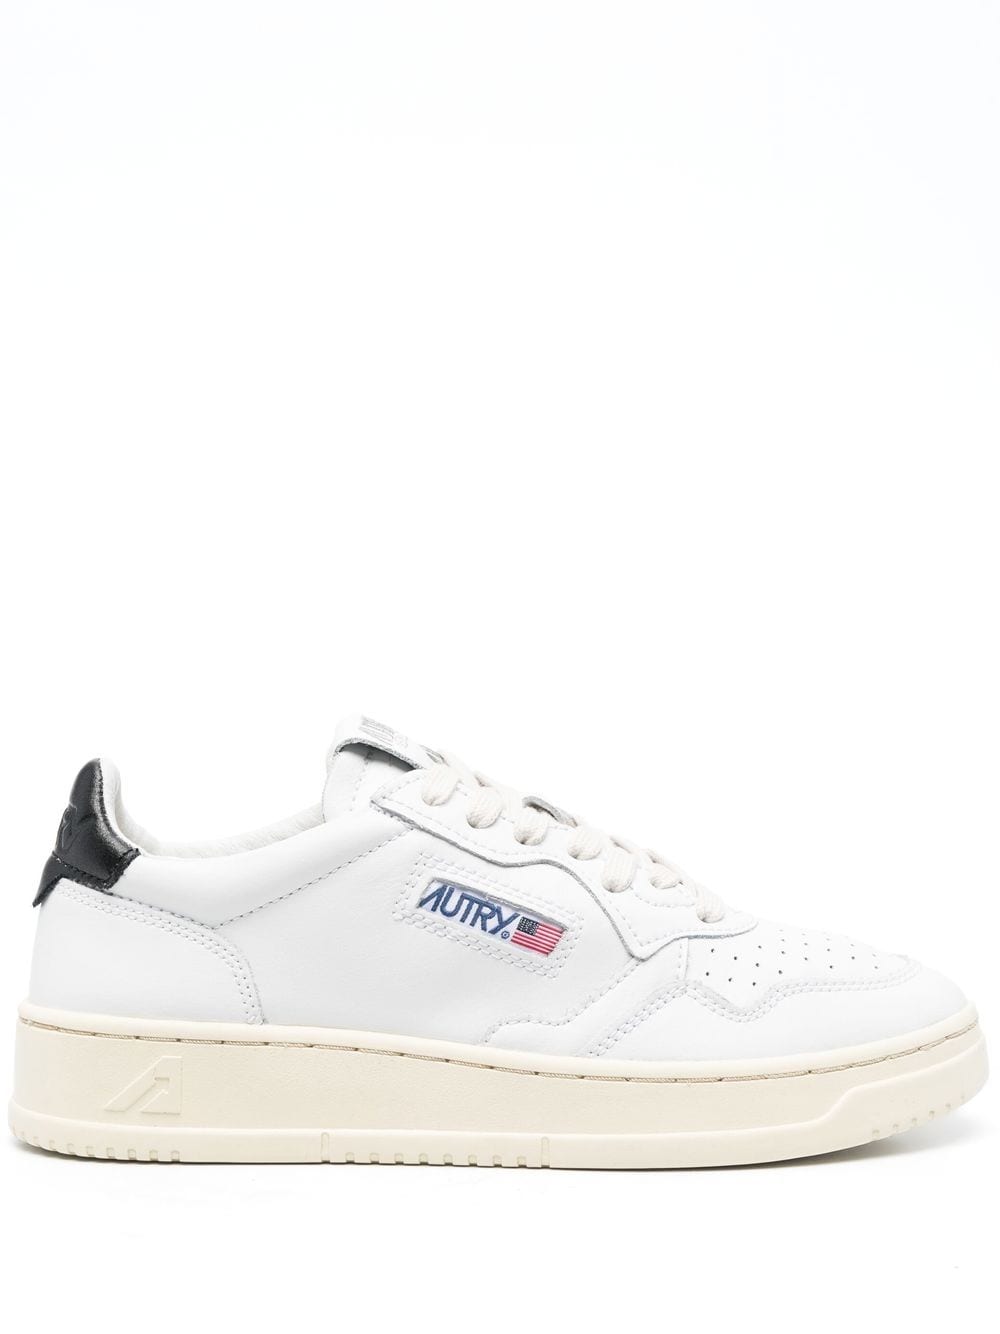 Image 1 of Autry AULW low-top sneakers